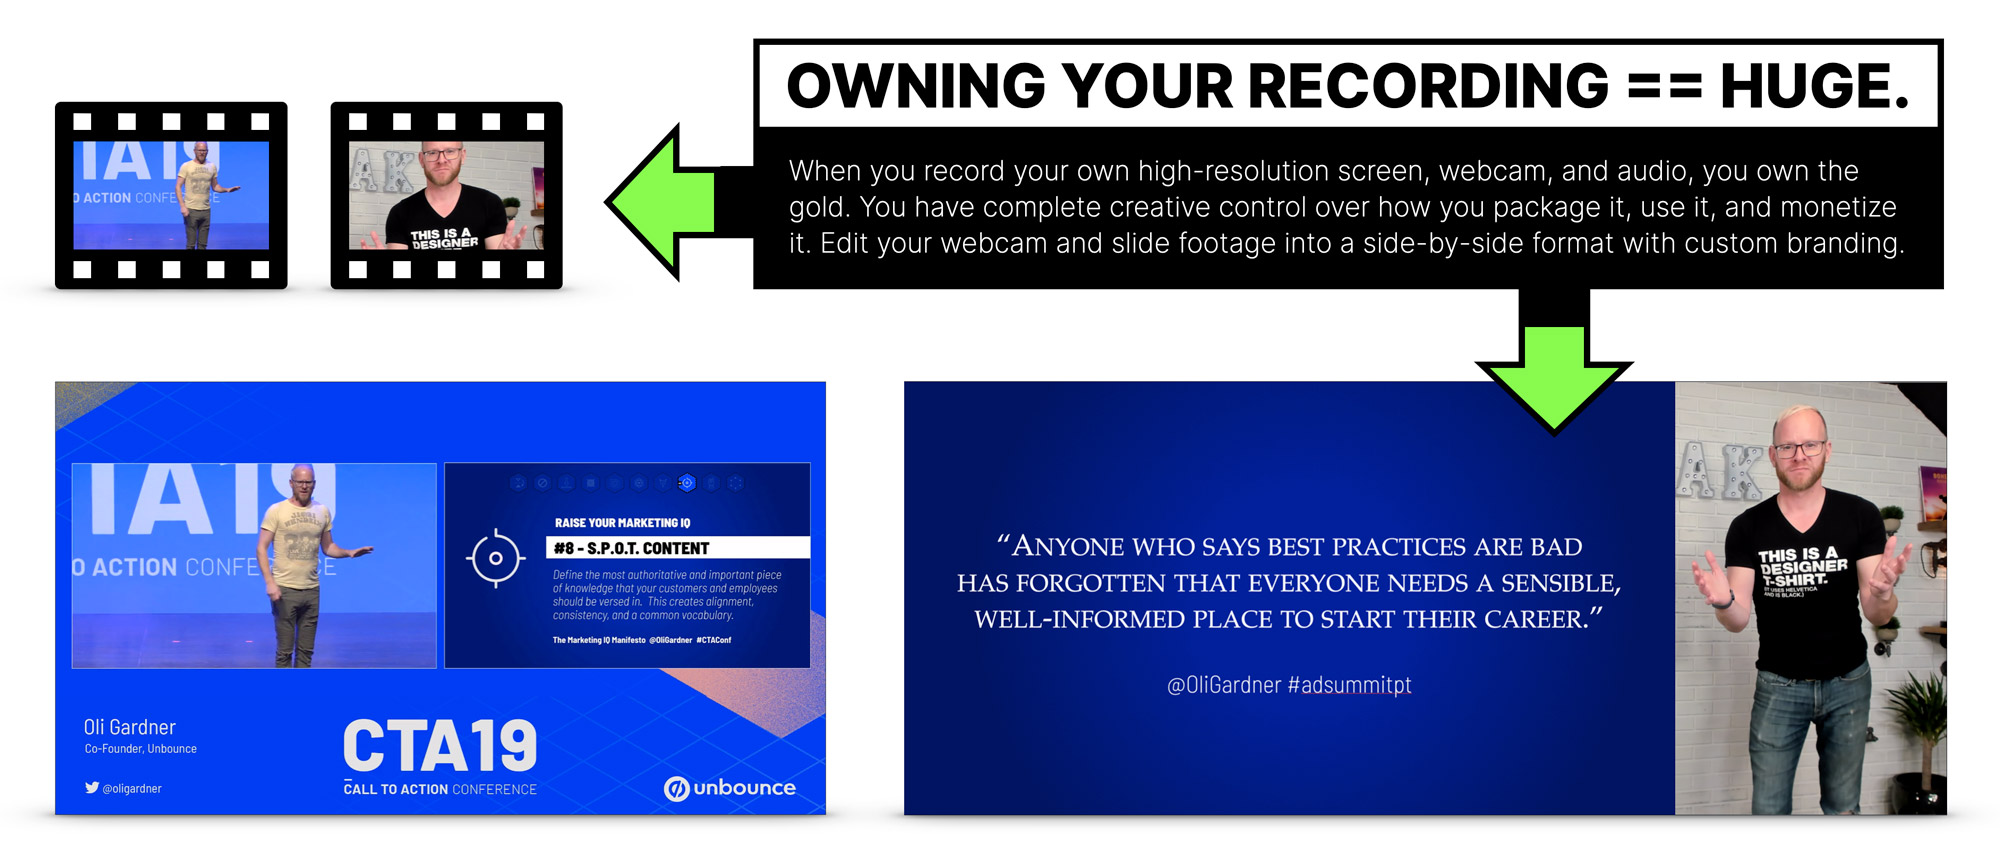 Record your own high-definition video of your virtual presentations